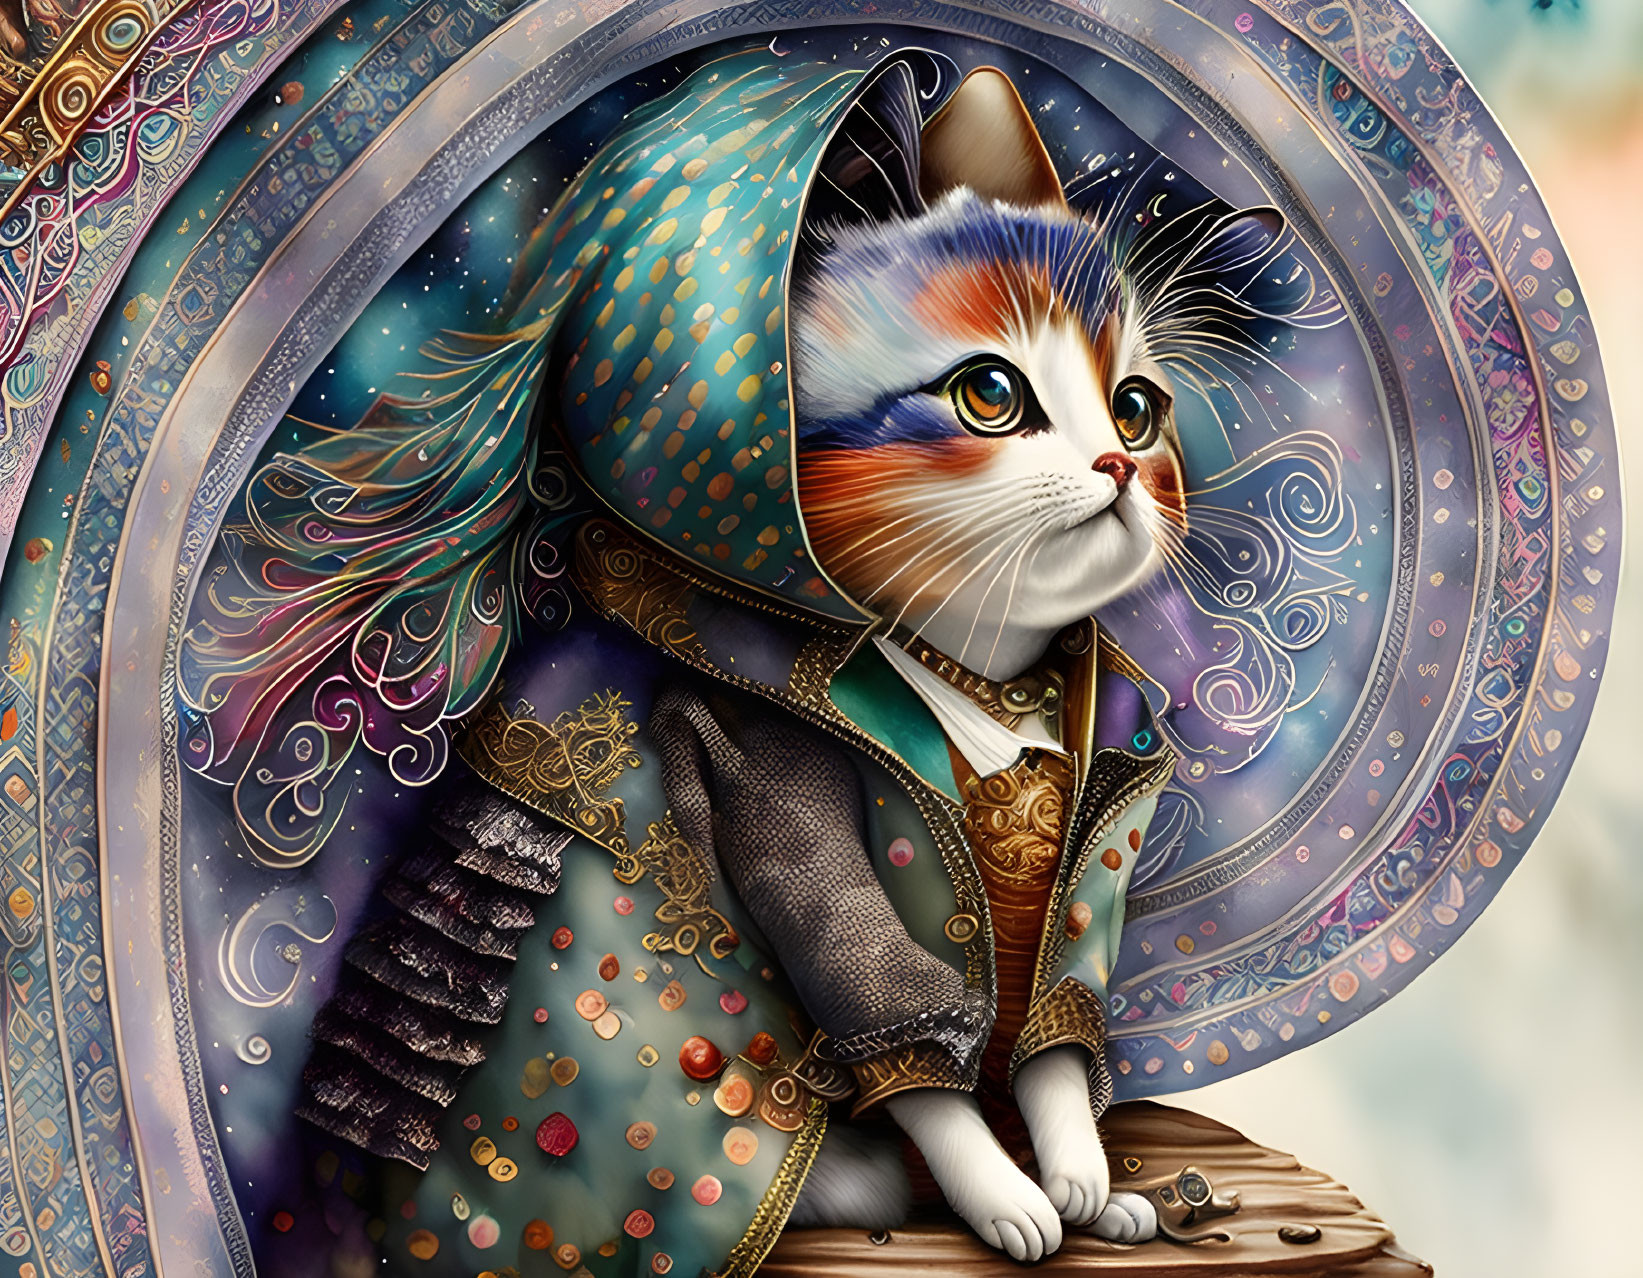 Intricately designed cat with human-like features in royal attire on patterned background